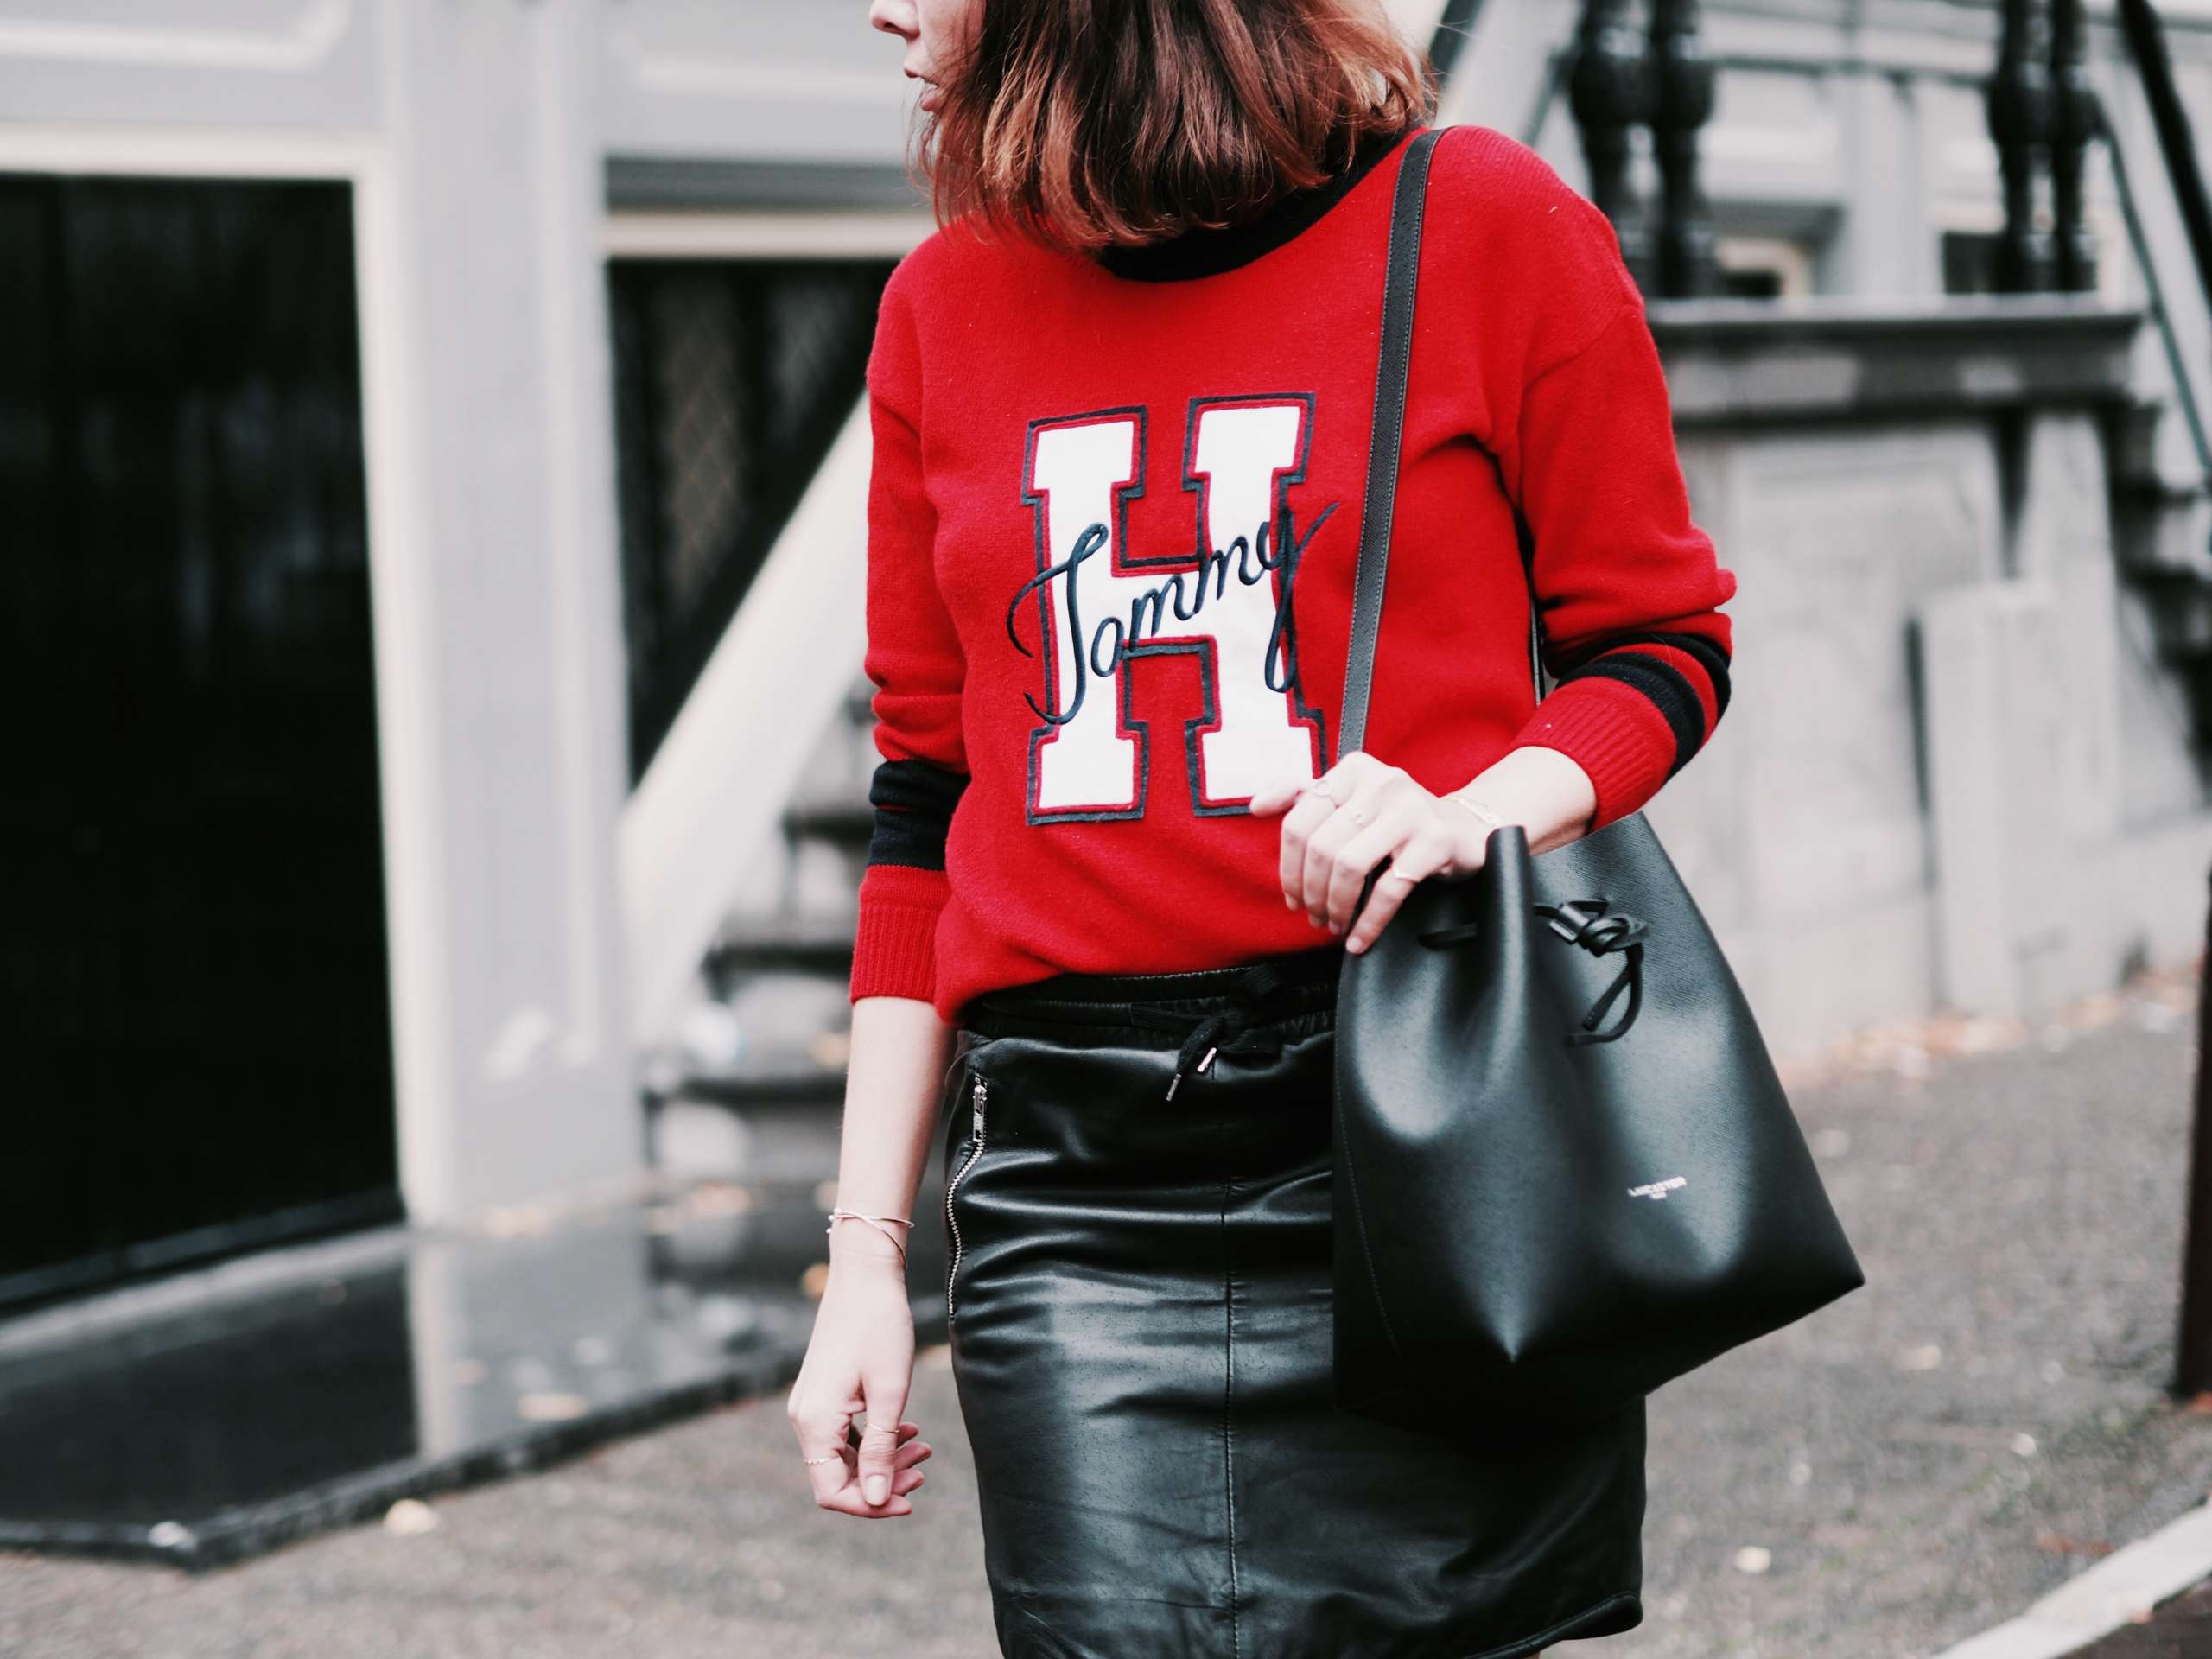 red-trend-red-sweater-fall/winter-2016-7-red-color-trend-tommy-hilfiger-red-fall/winter-2016-17-trend-nickyinsideout